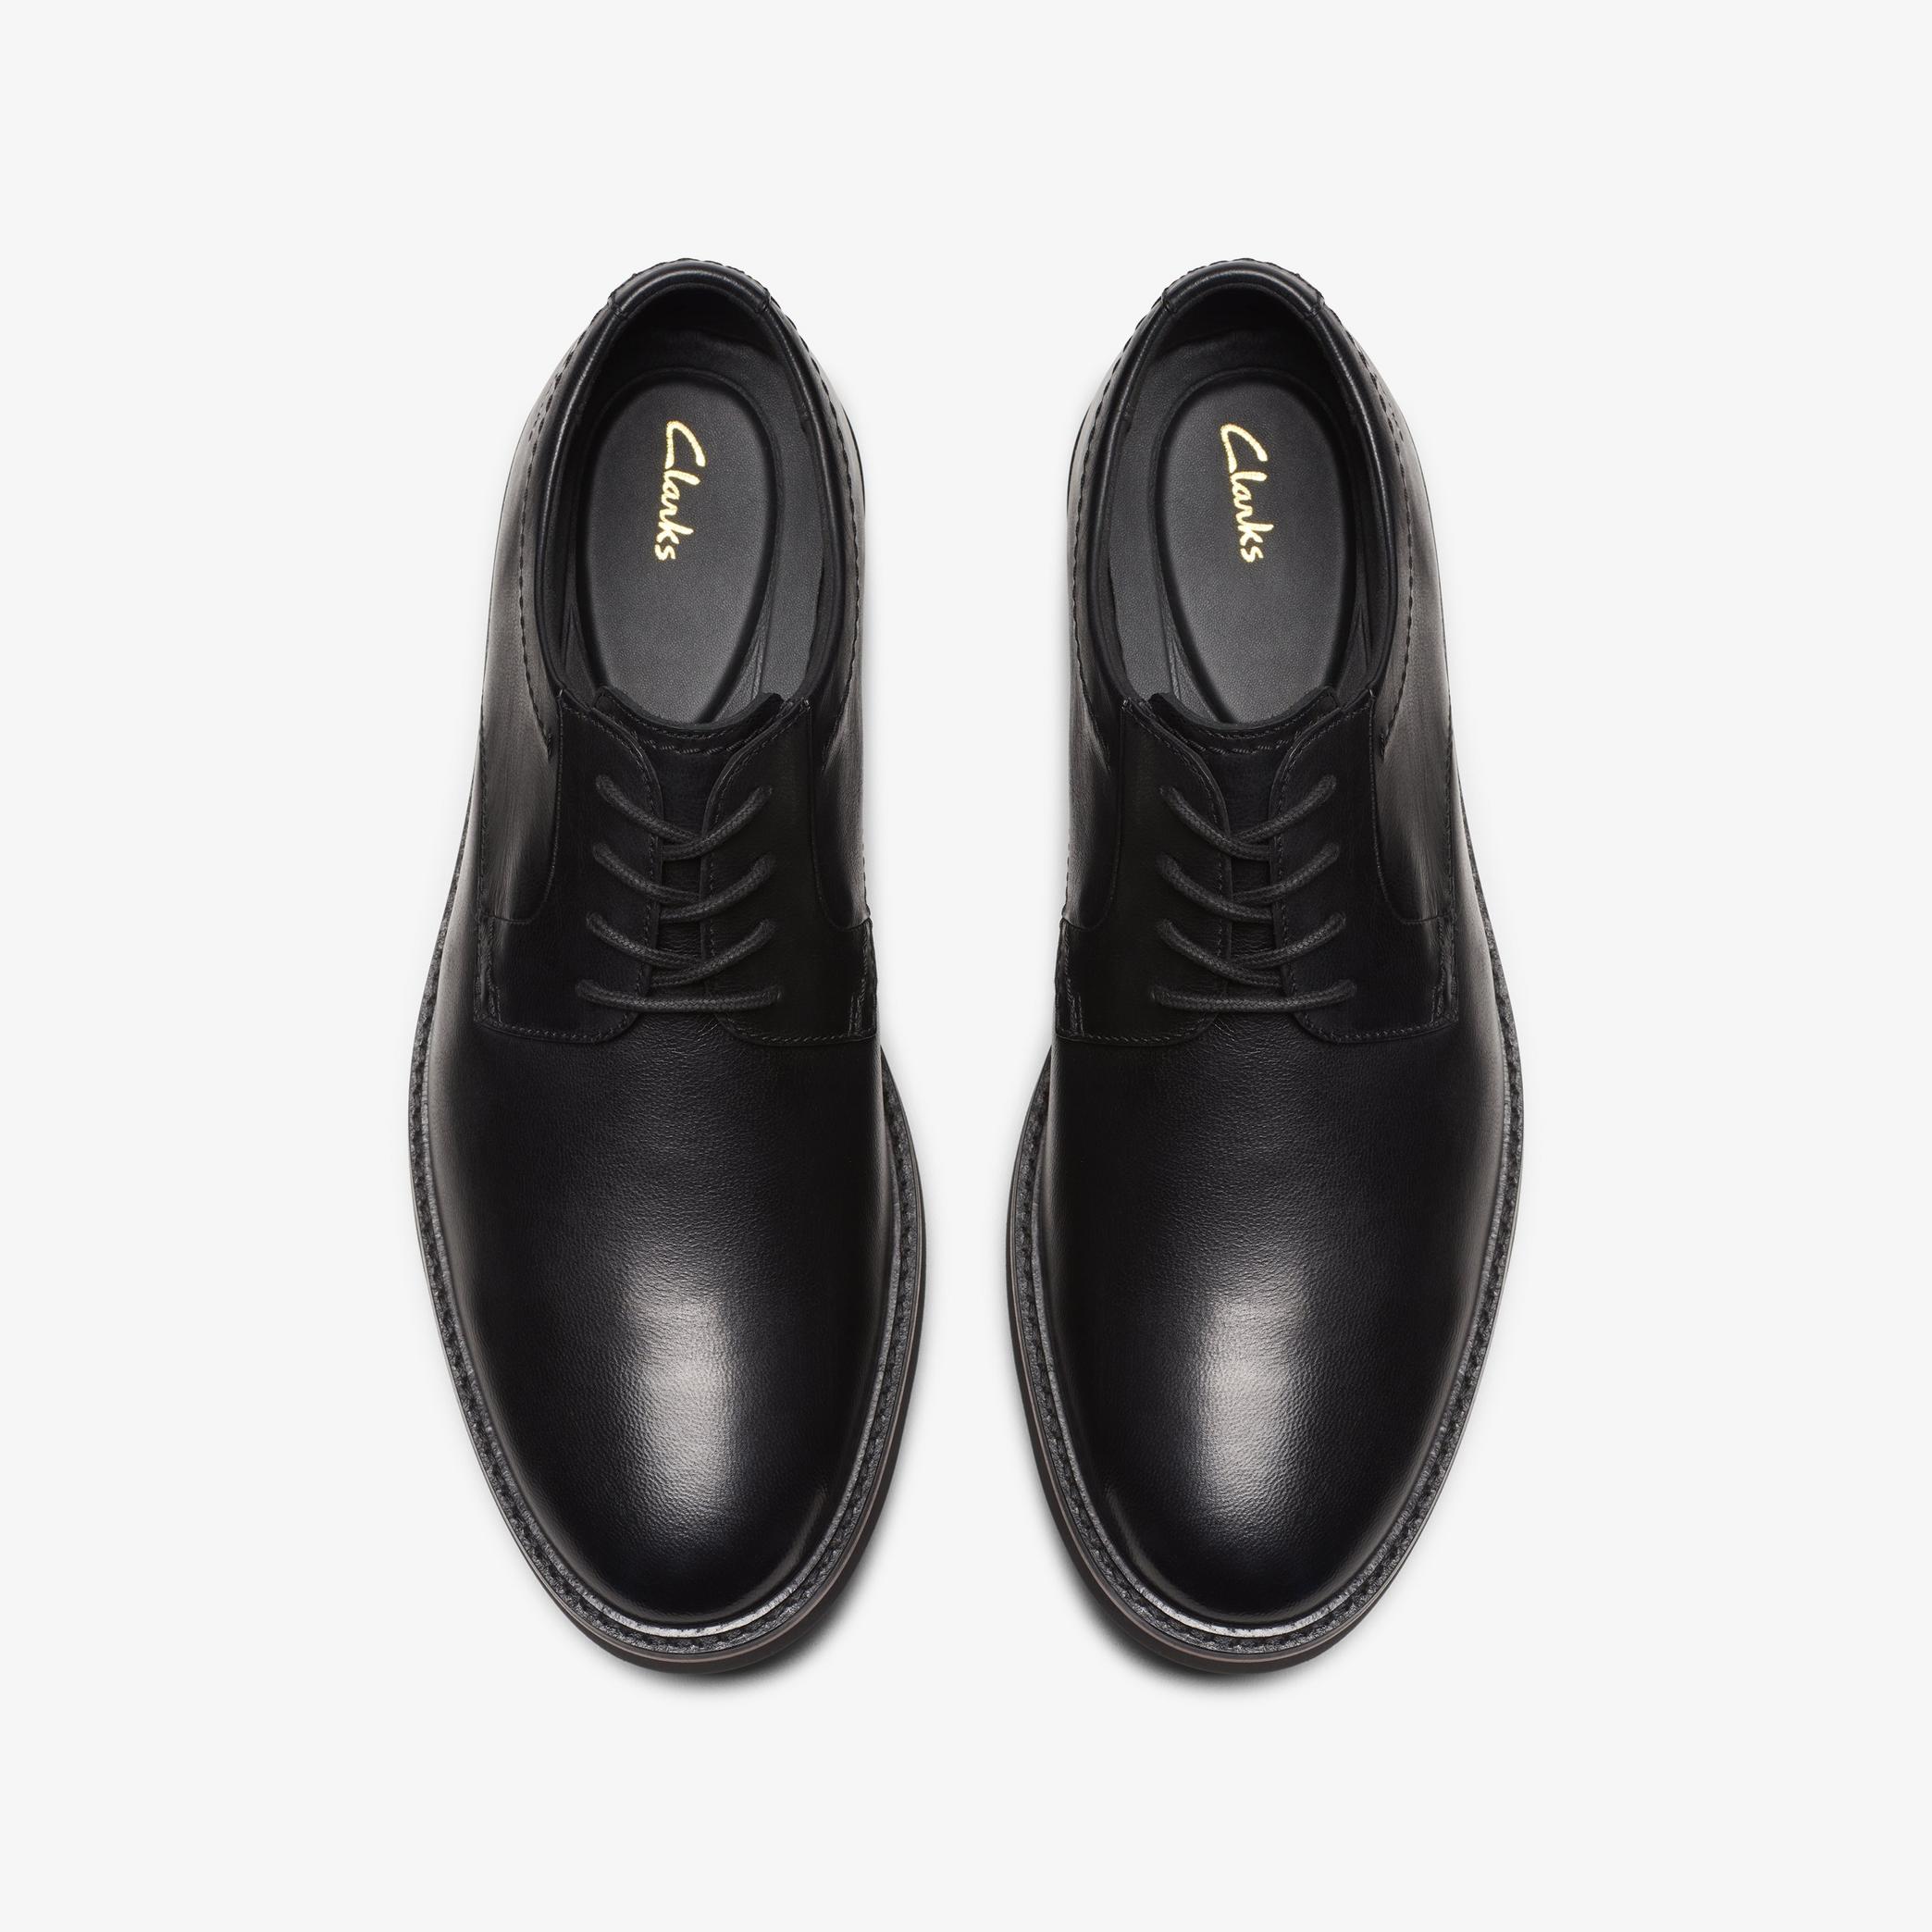 Atticus Lace Black Oxford Shoes, view 7 of 7